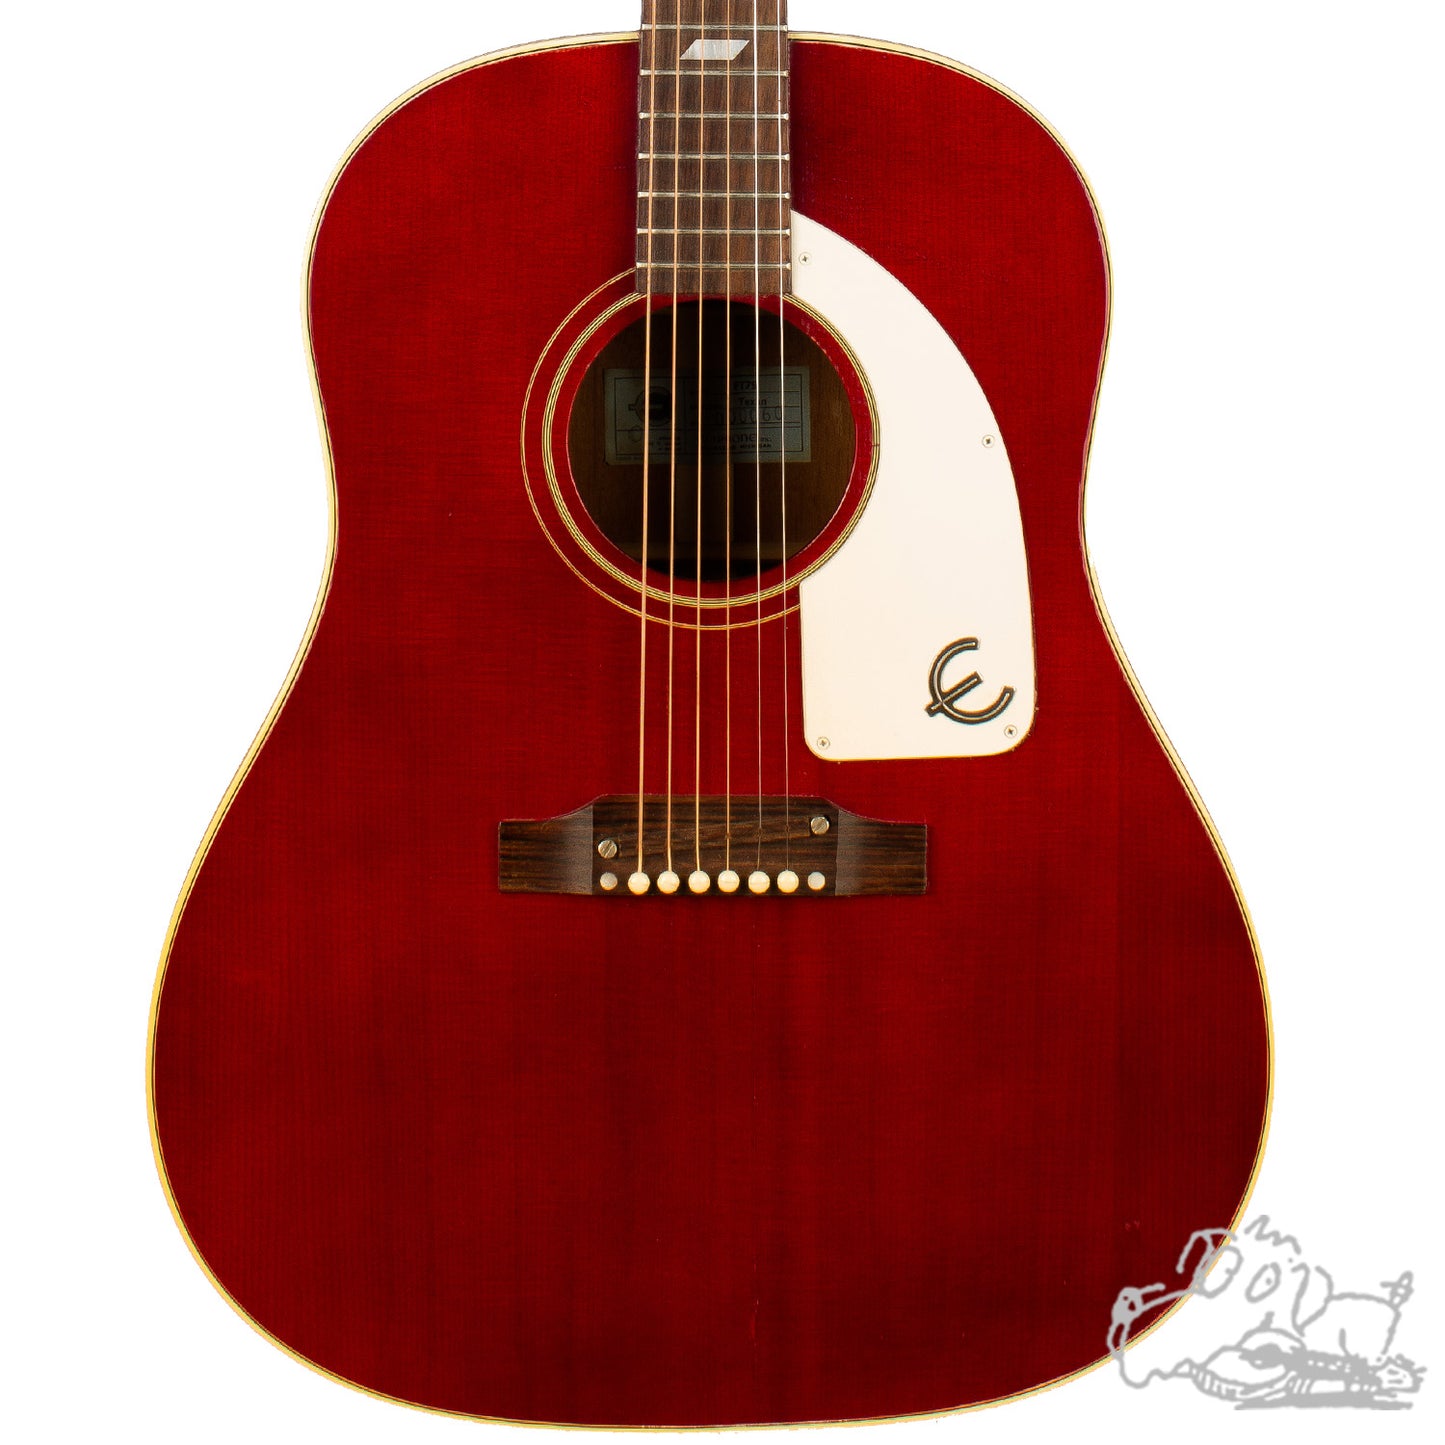 1968 Epiphone FT-79 Texan in Vintage Cherry